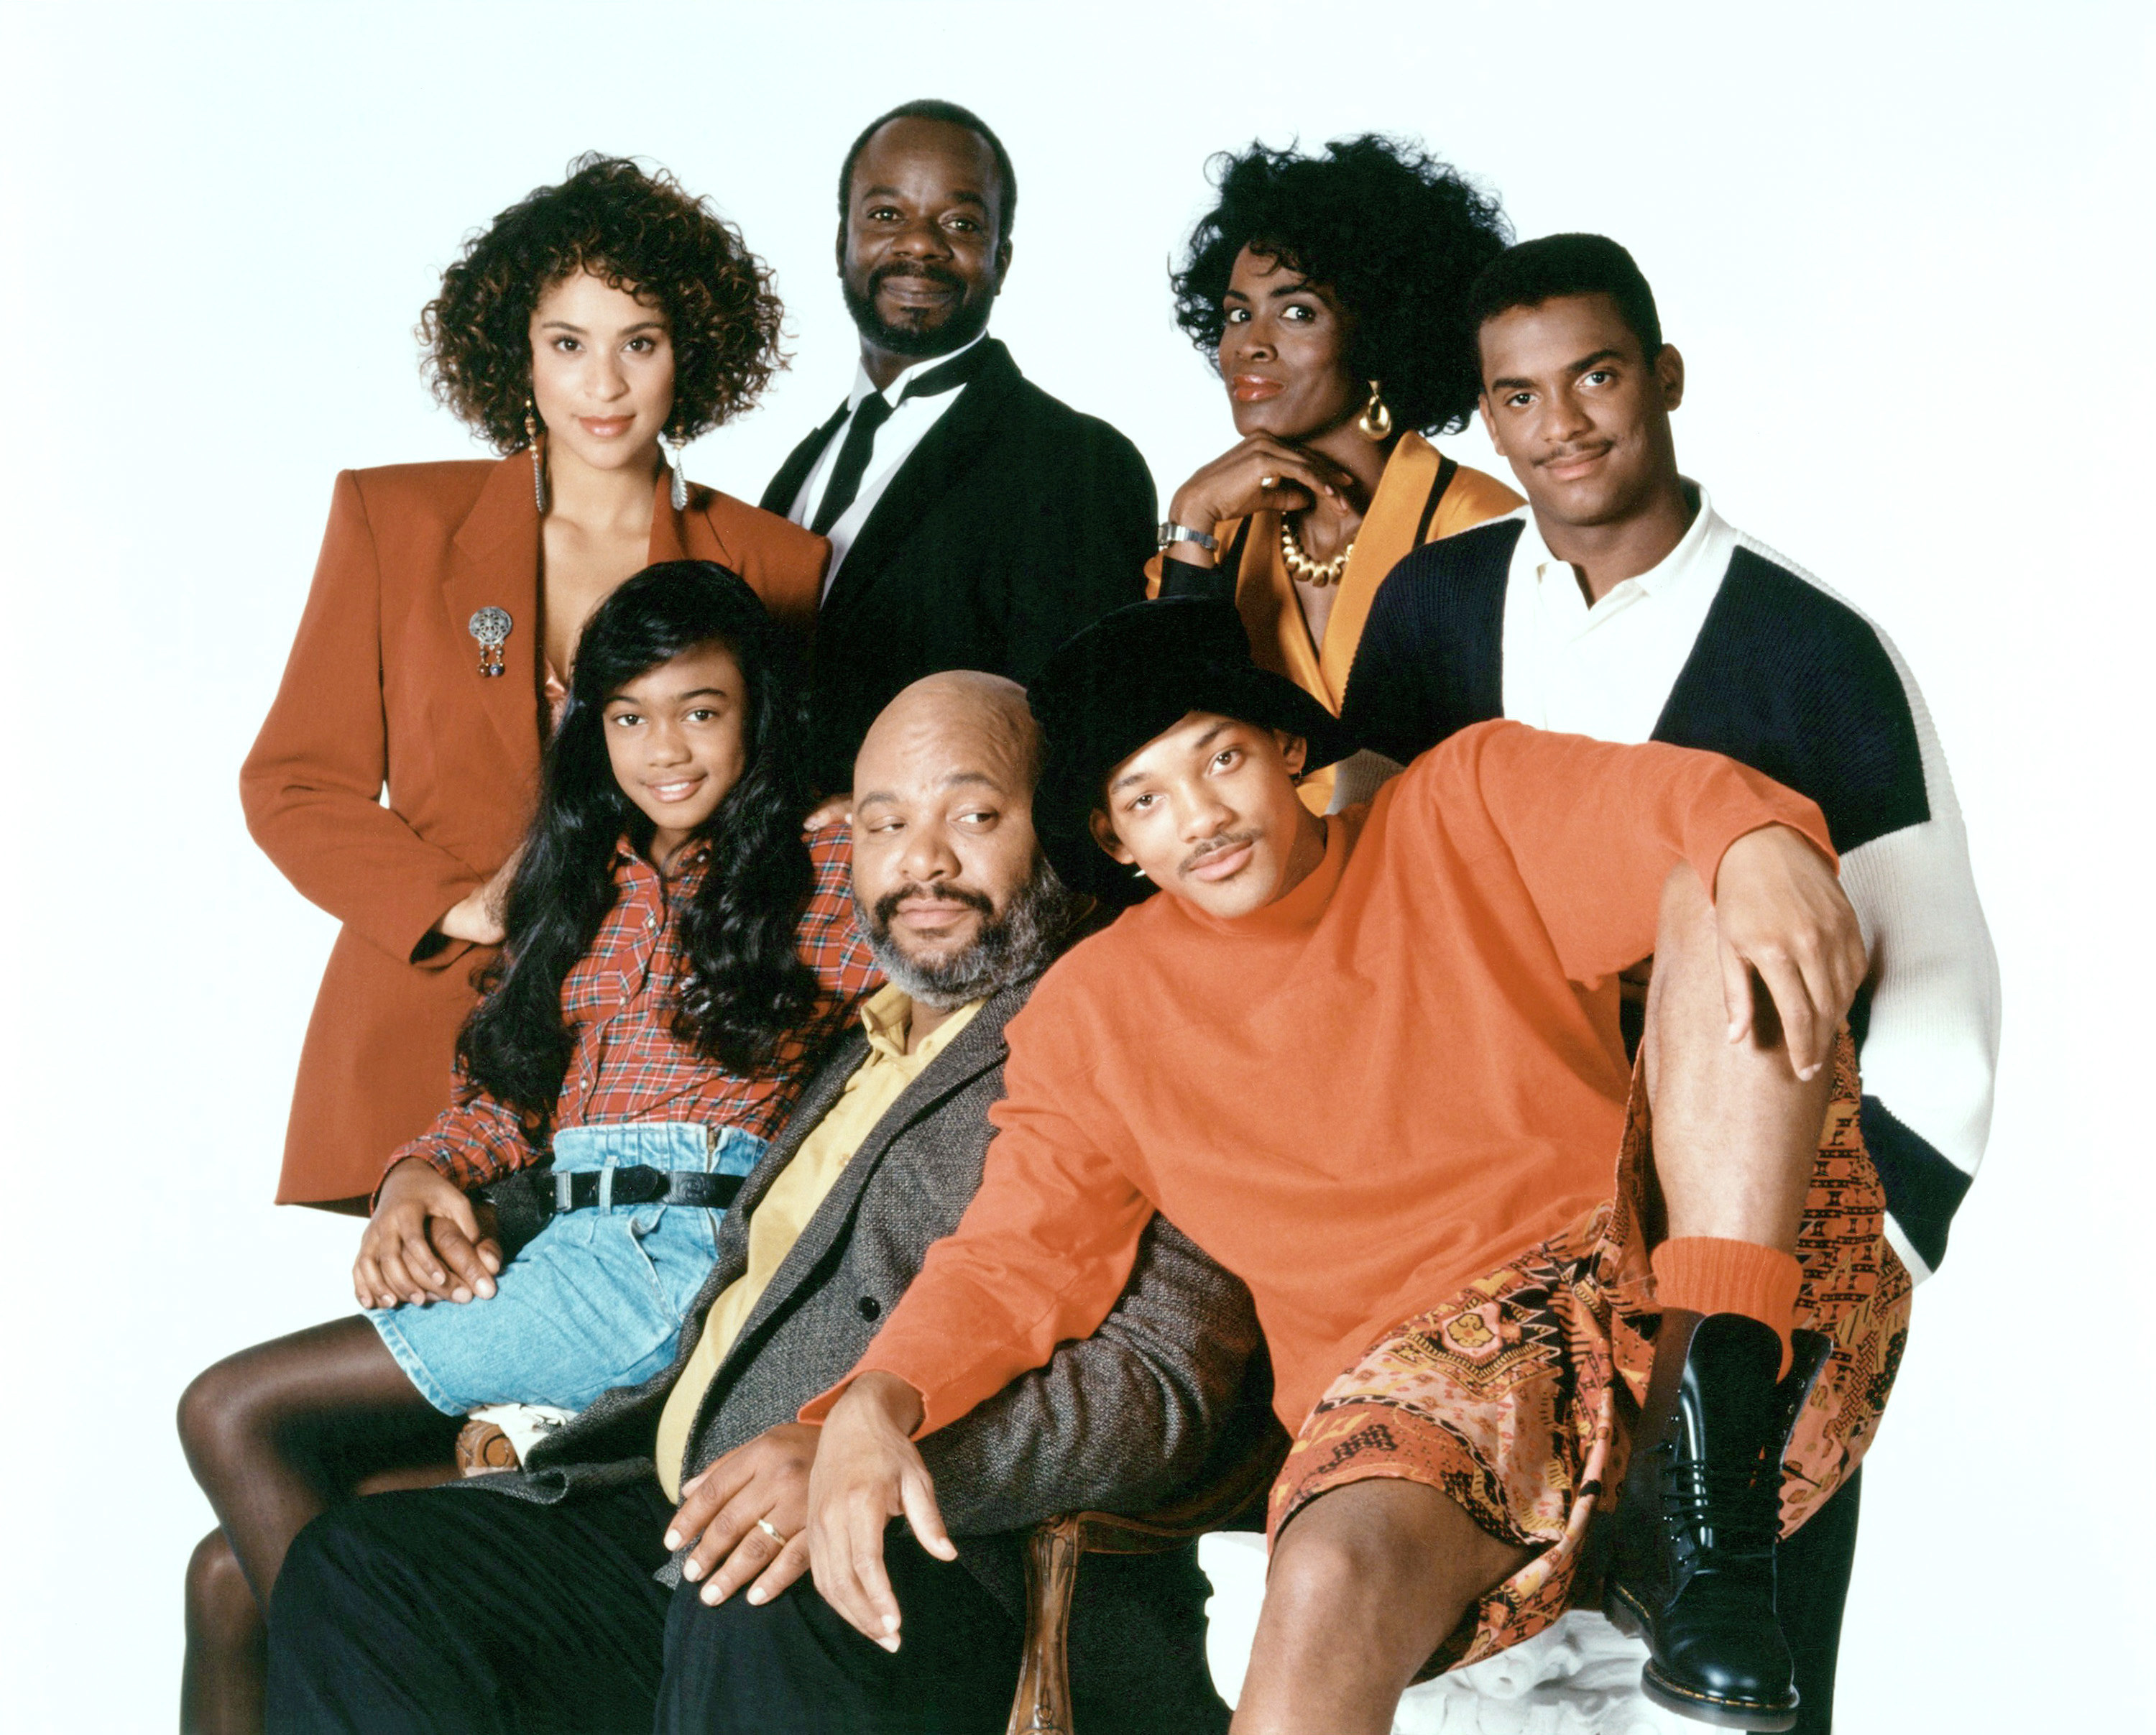 A promotional photo of the cast